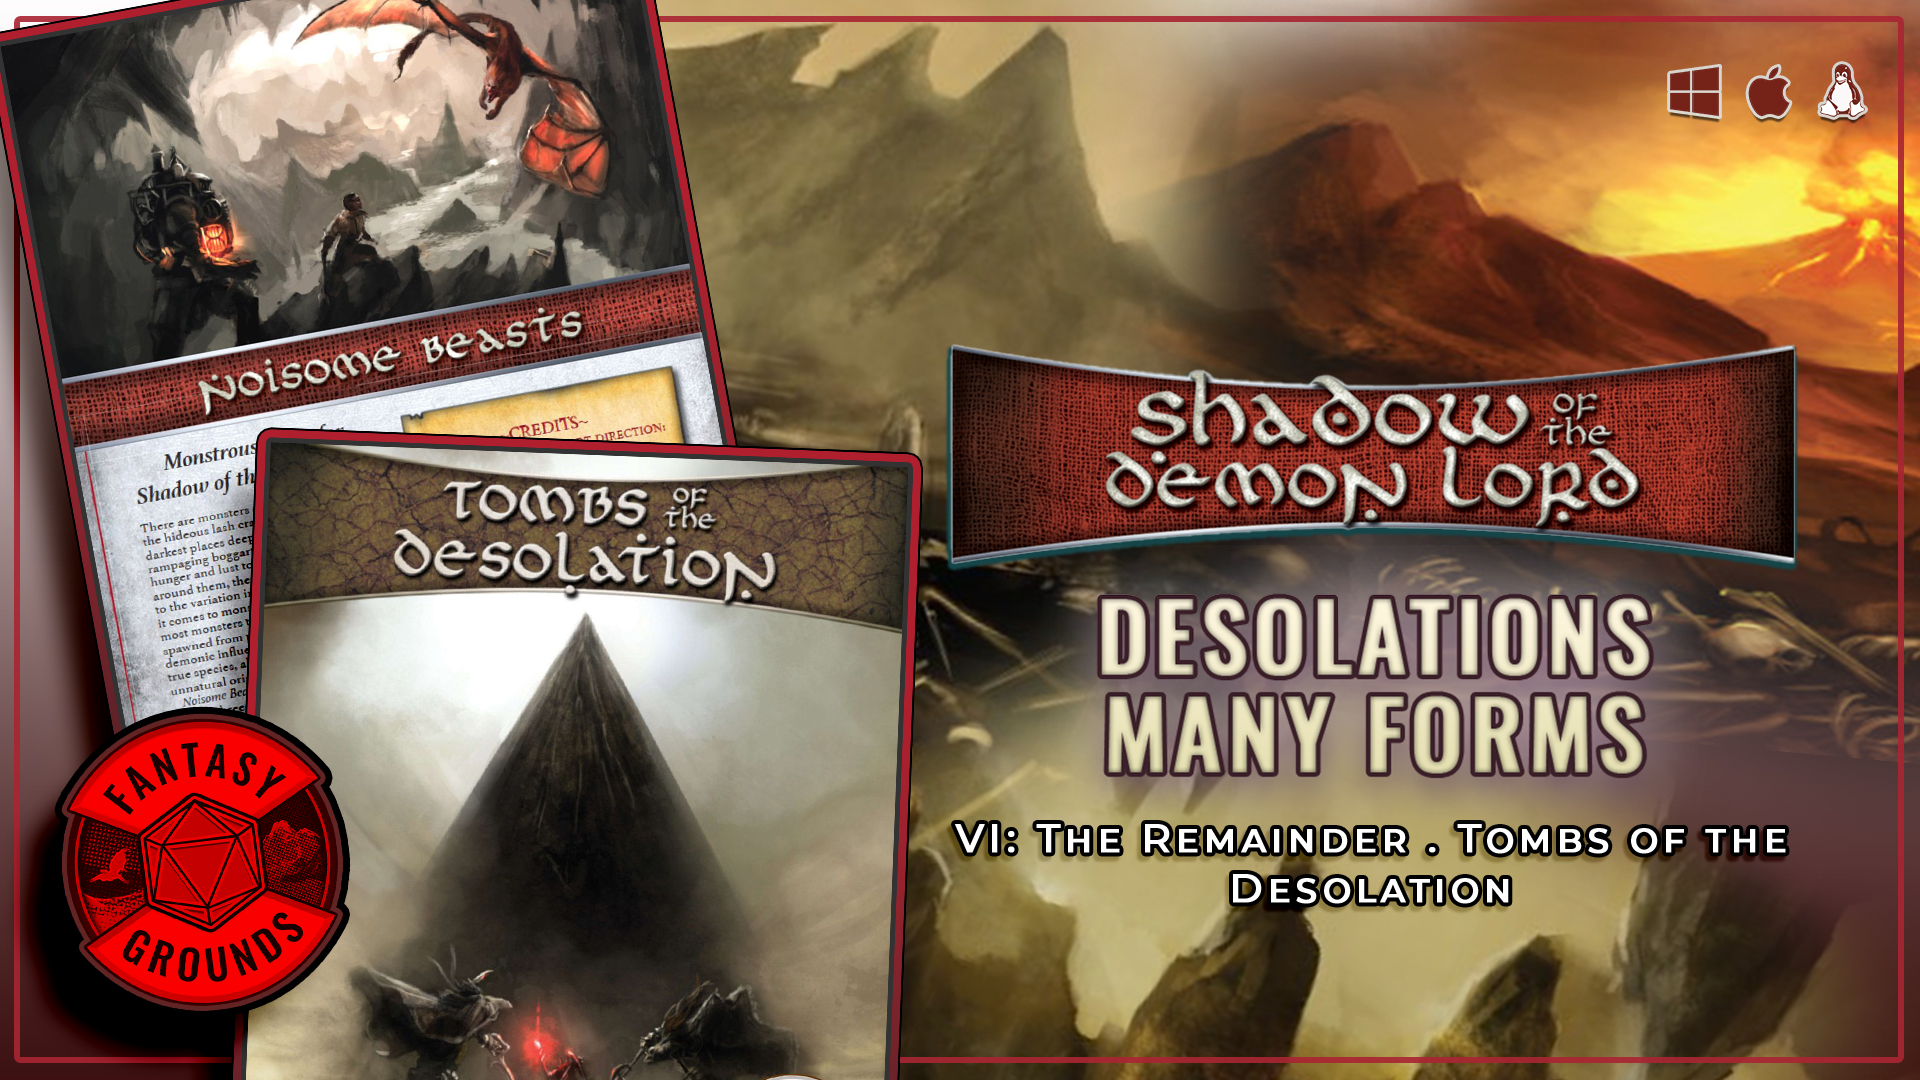 Shadow of the Demon Lord Monstrous Pack VI, Tomb of Desolation (IPFGSDLSETD).jpg